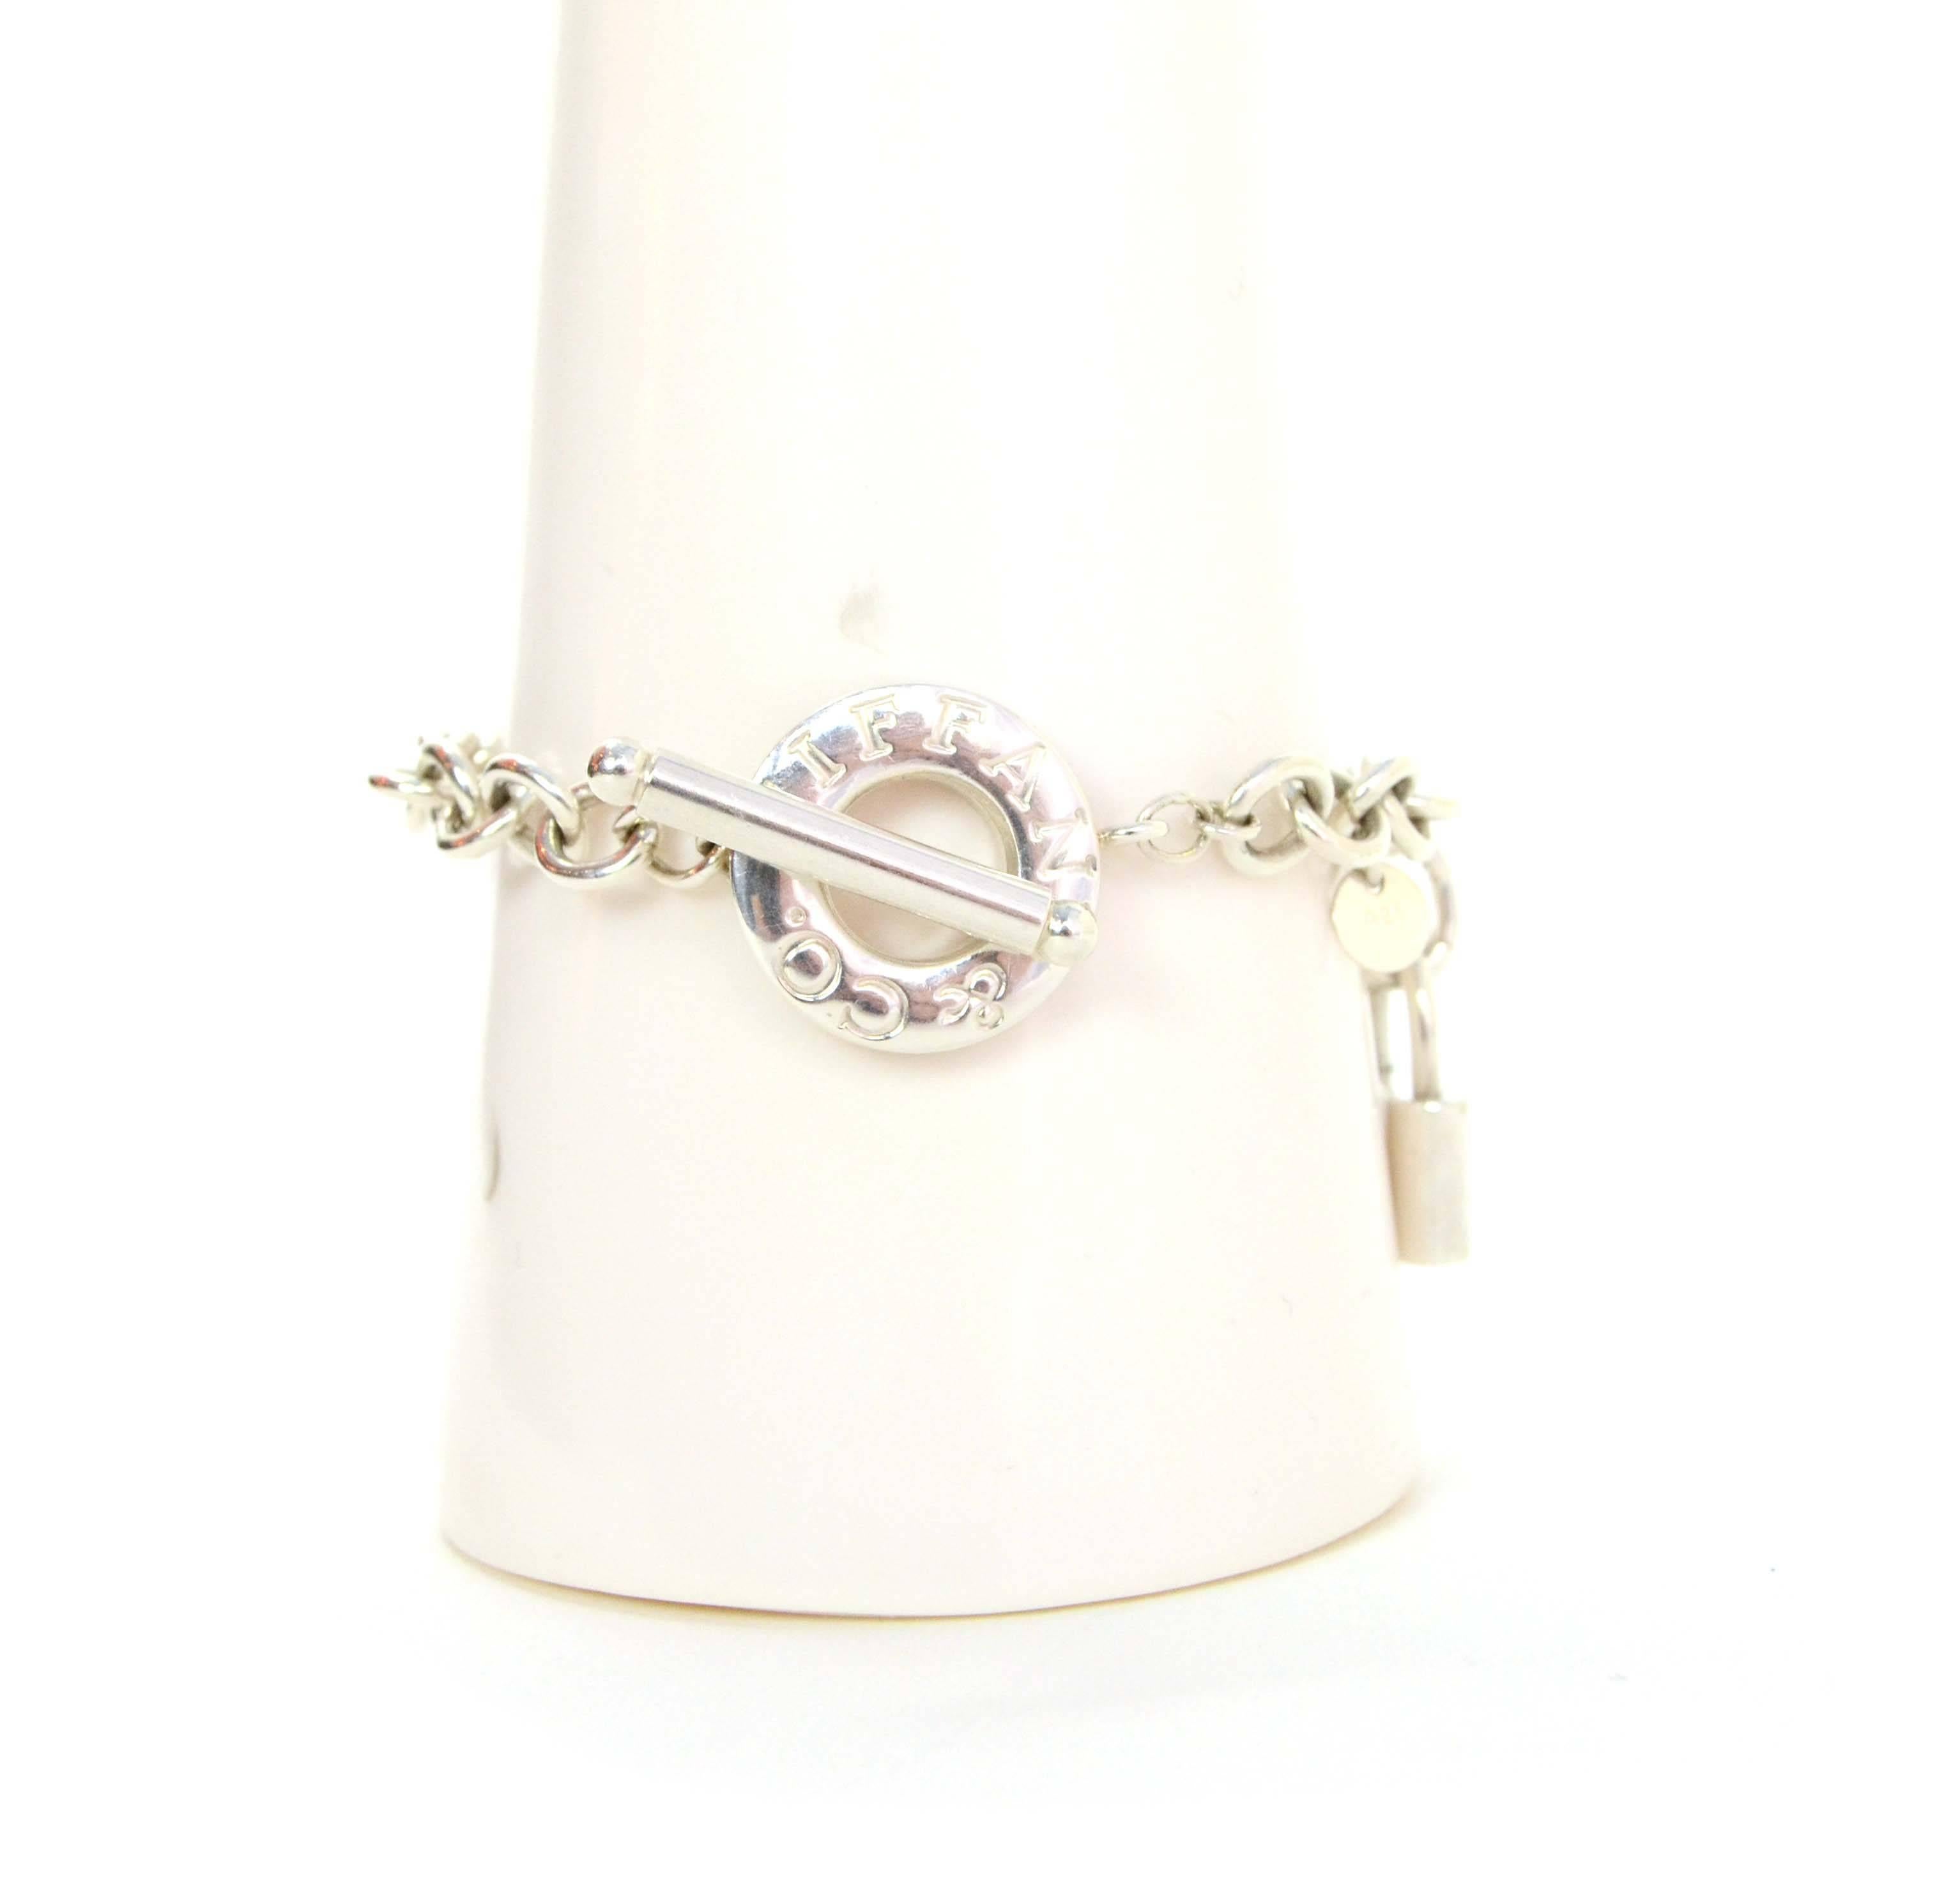 Tiffany & Co. Sterling Lock & Toggle Bracelet

Made In: Italy
Color: Silver
Materials: Sterling silver
Closure: Toggle closure
Stamp: T&Co. Ag 925 Italy
Retail Price: $275 + tax
Overall Condition: Excellent pre-owned condition with the